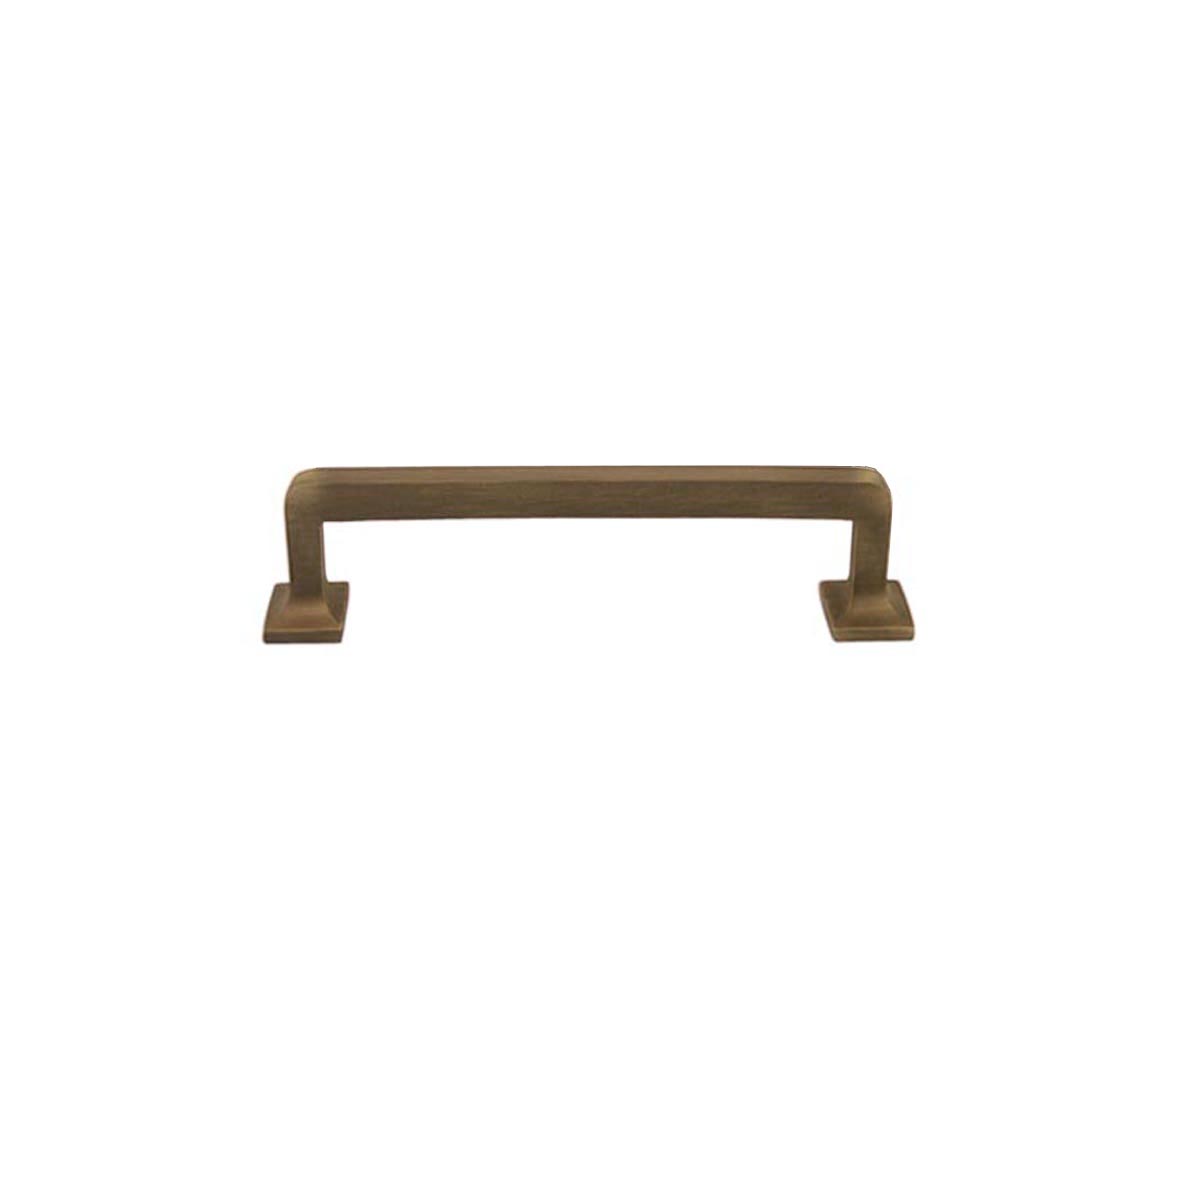 Substantial 4&quot; Brass Cabinet Handle, Paxton Hardware